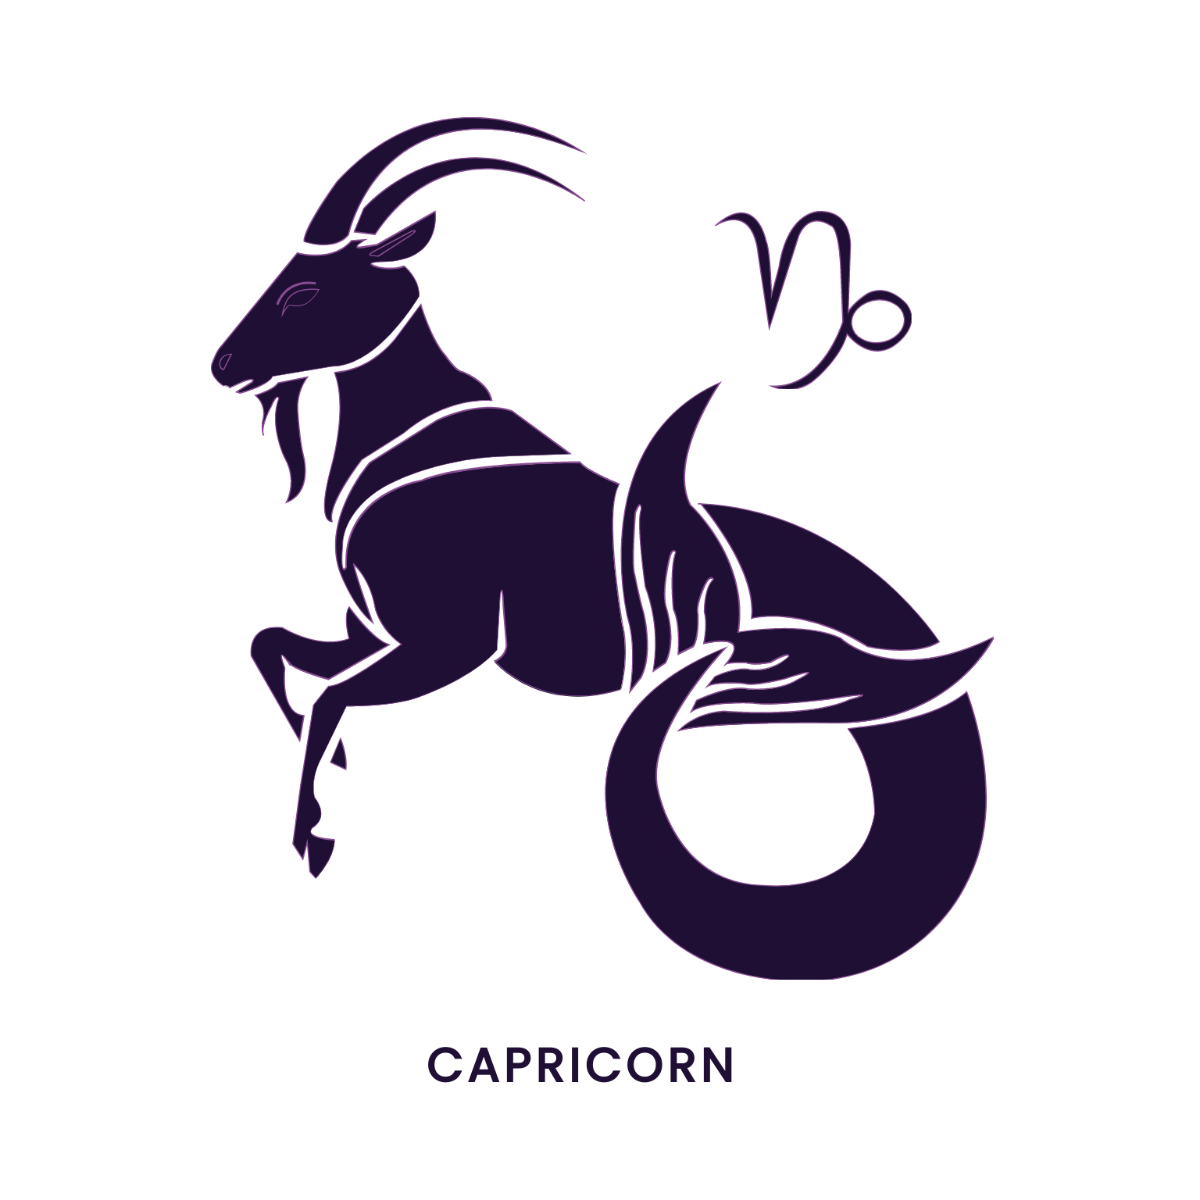 FREE Capricorn Vector Templates & Examples - Edit Online & Download ...